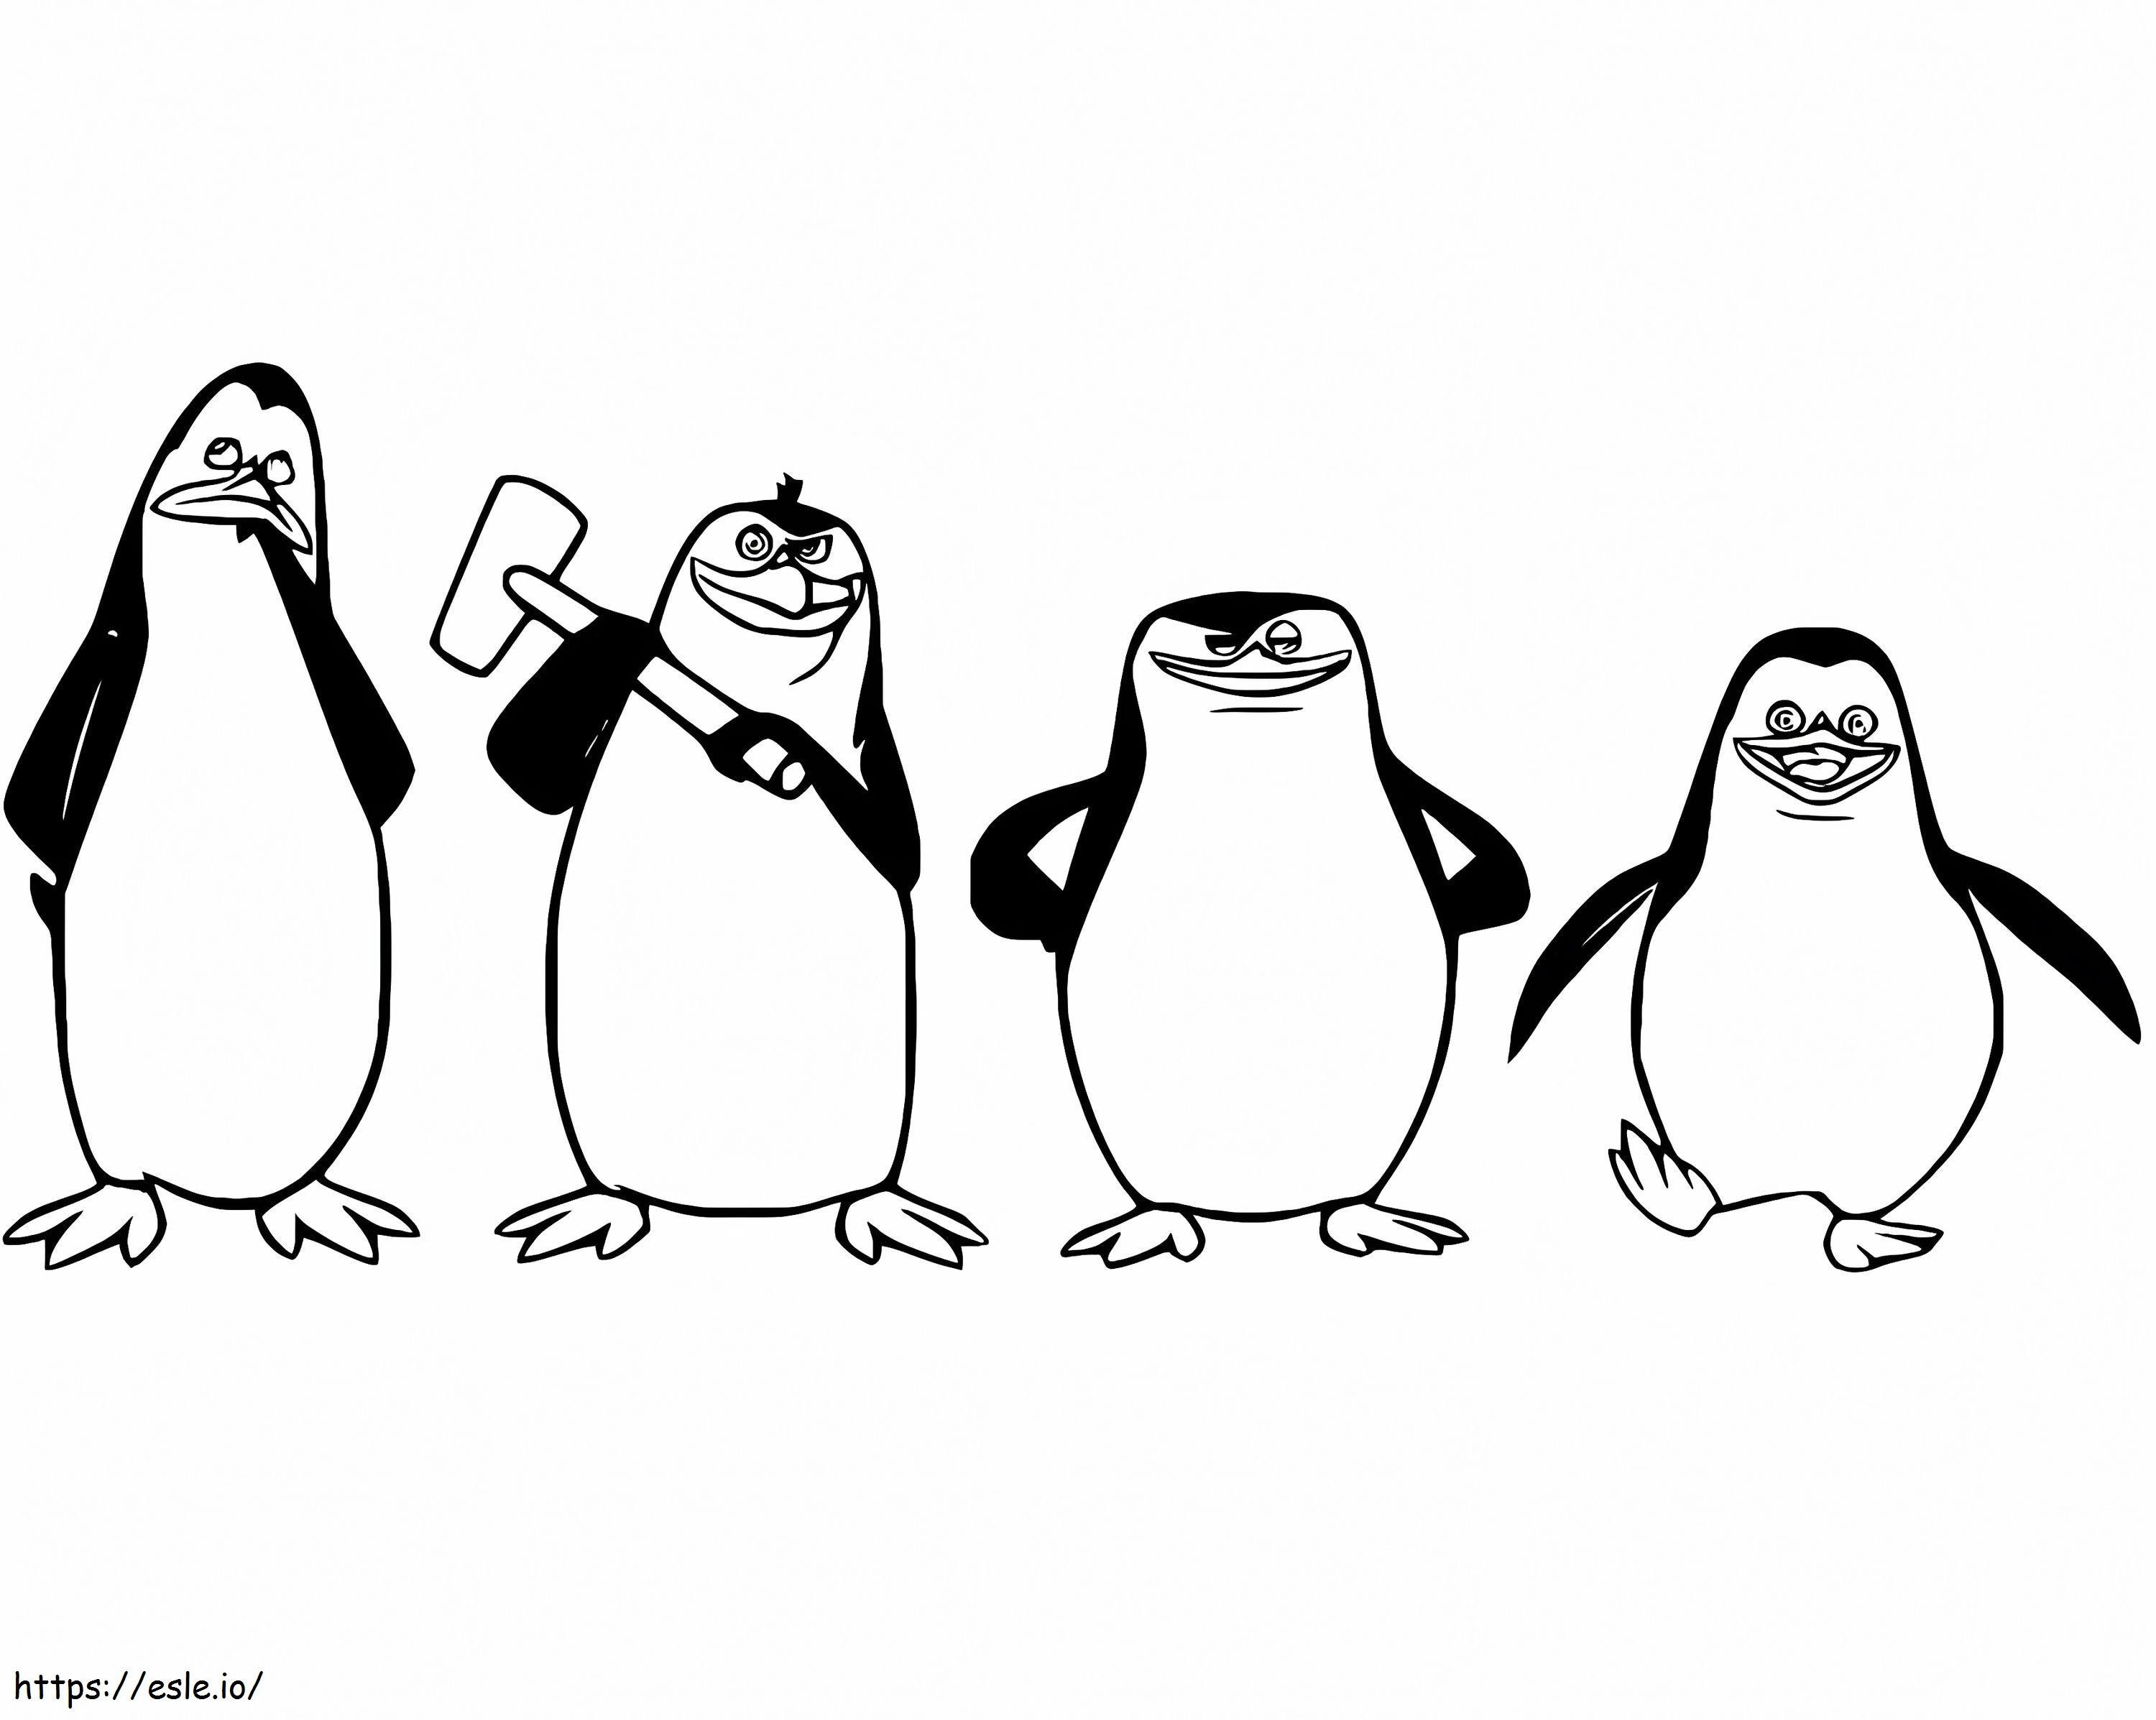 Free Penguins Of Madagascar coloring page